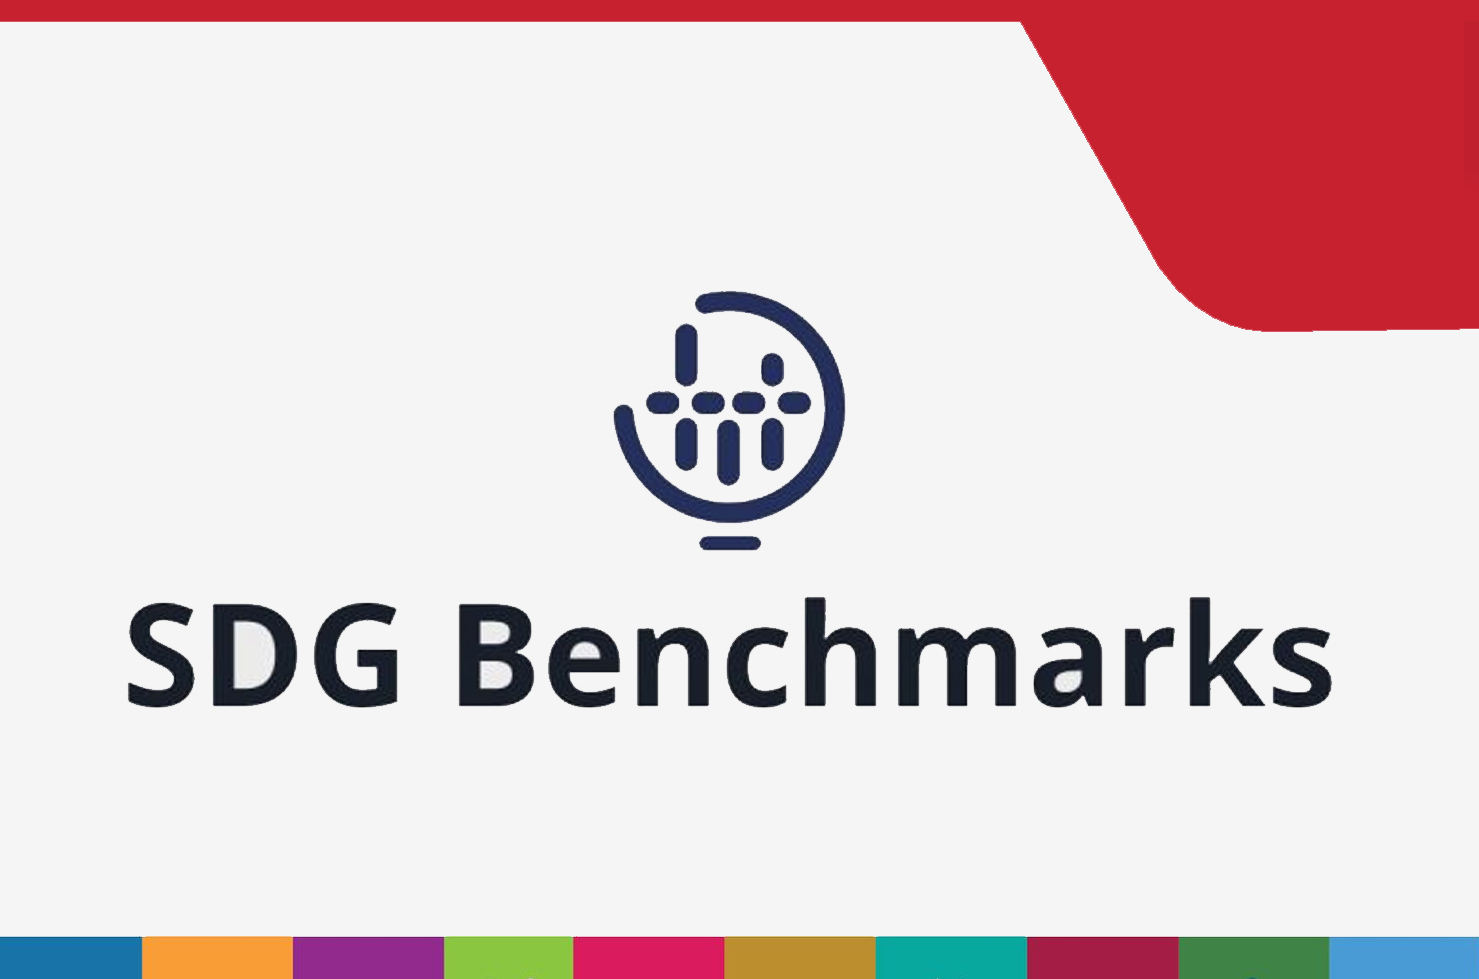 Setting Benchmarks to Achieve SDG 4 Targets